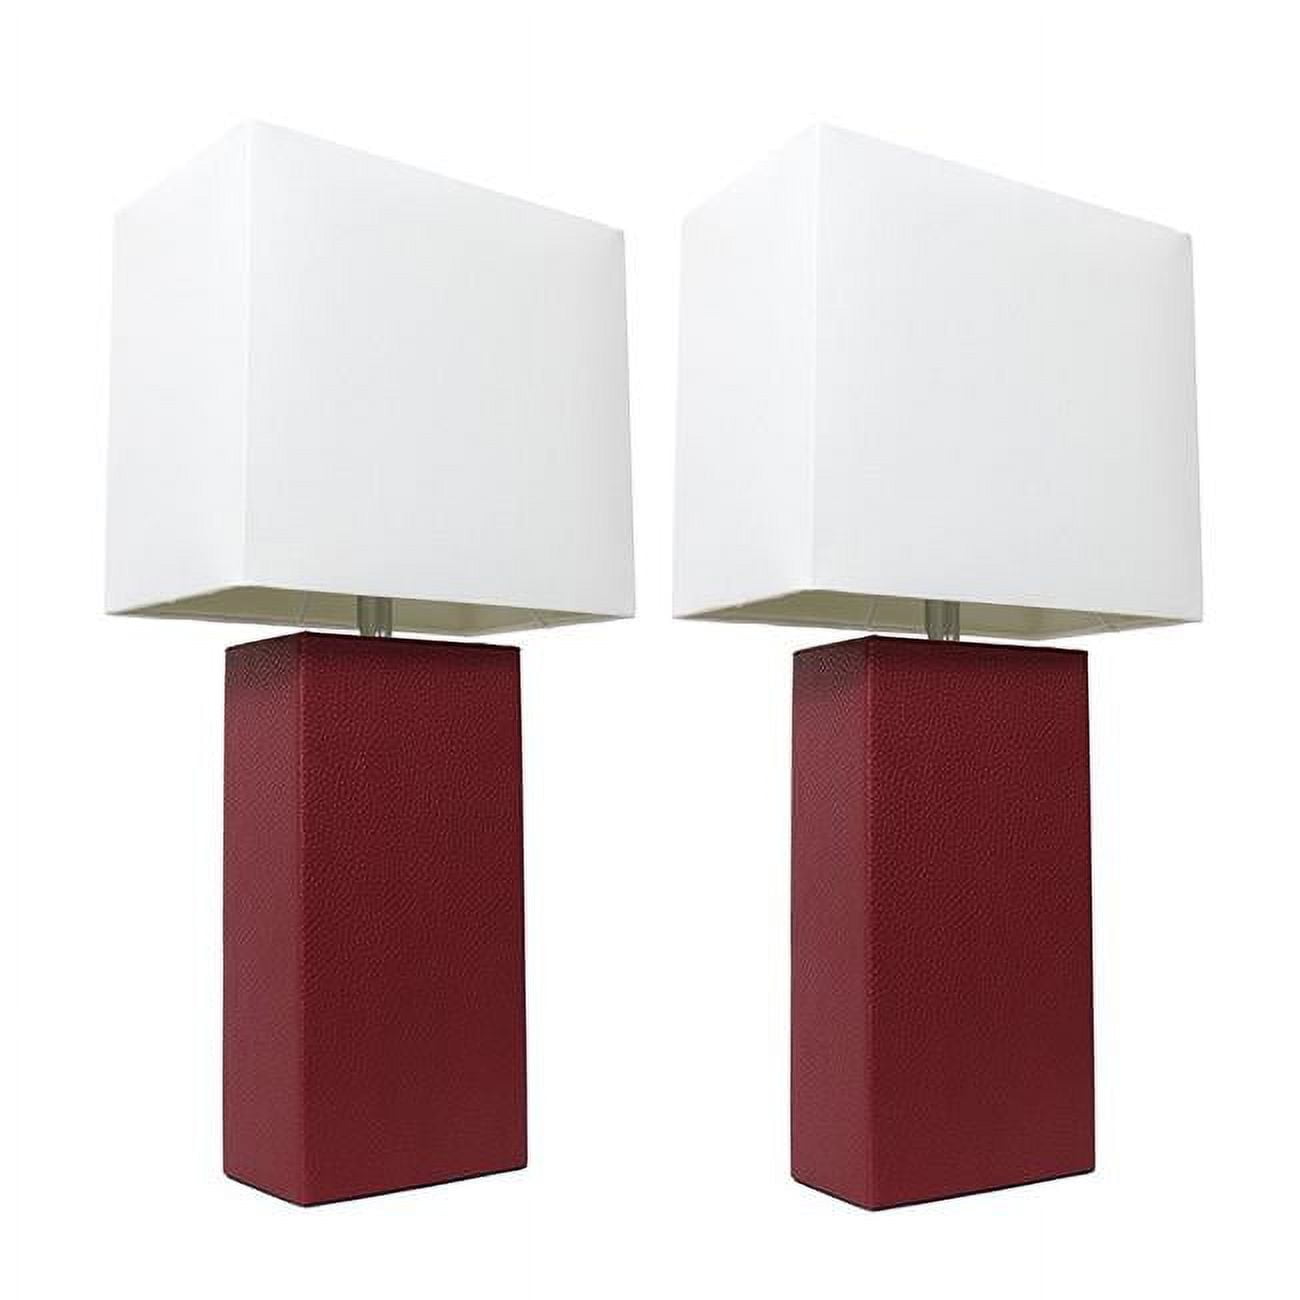 Alltherages Lc2000-red-2pk Elegant Designs Modern Leather Table Lamp With White Fabric Shade - Red, Pack Of 2